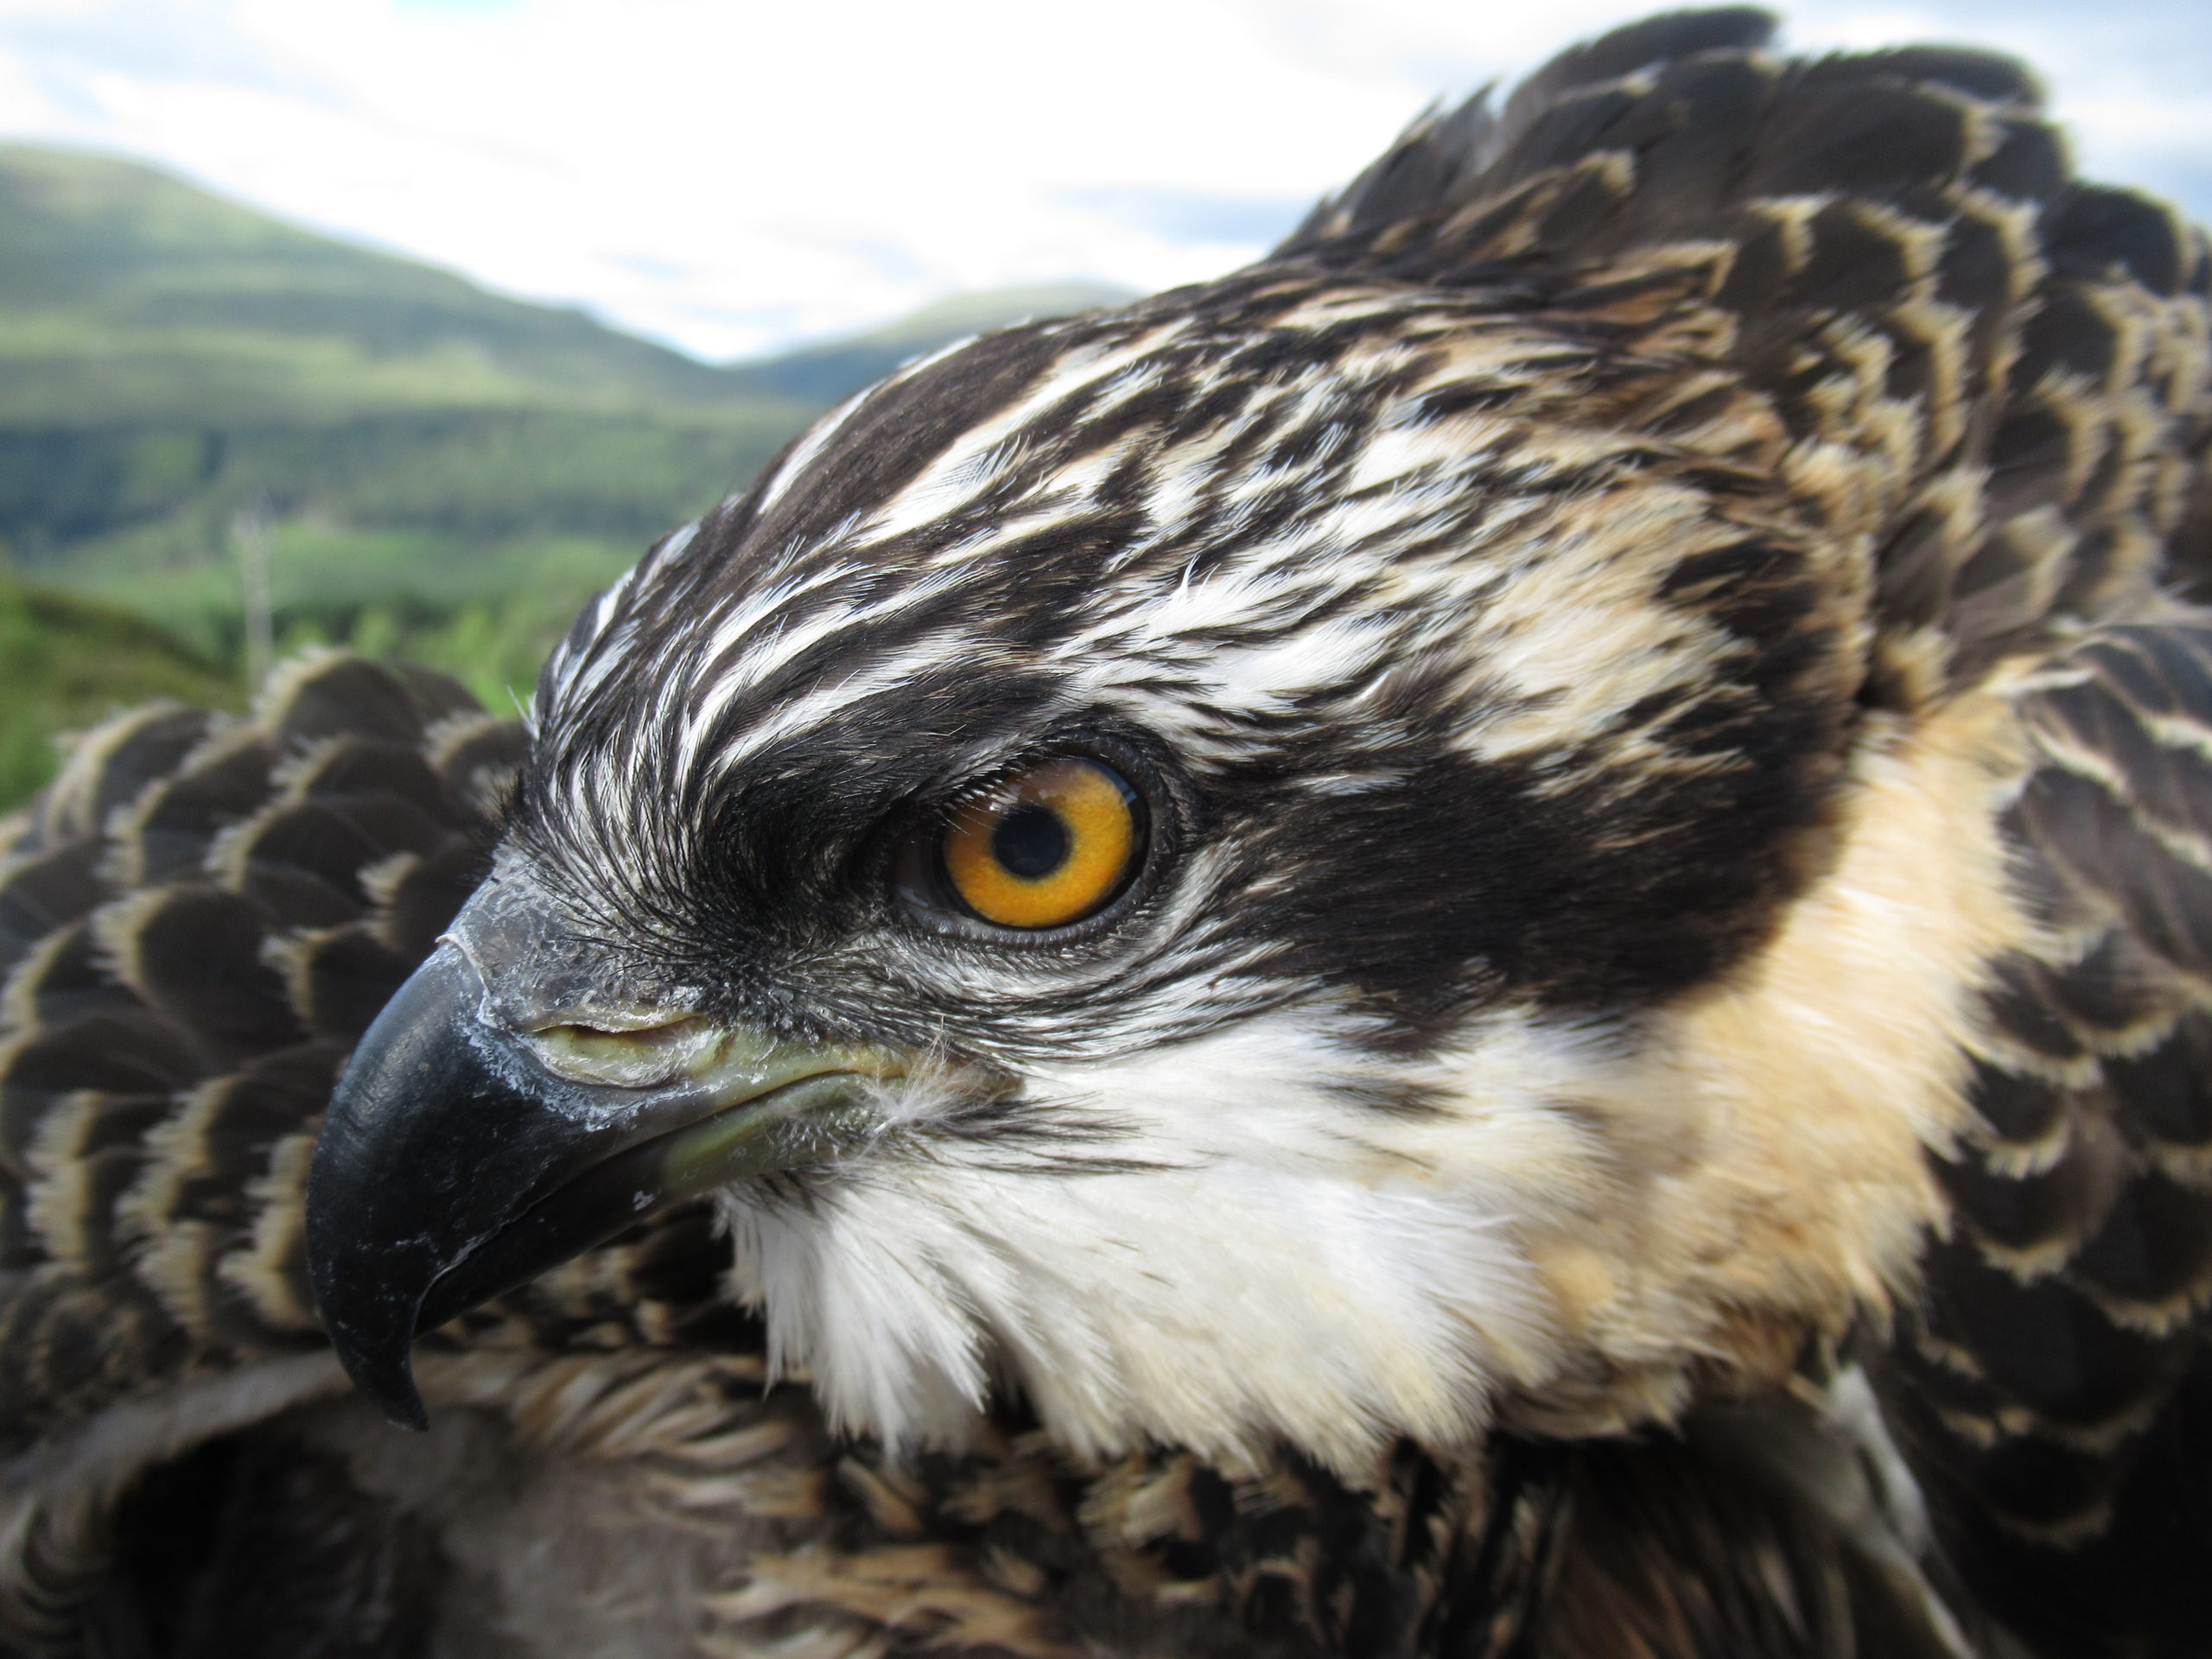 Birds of a feather: The ospreys are expected to migrate south towards the end of August.